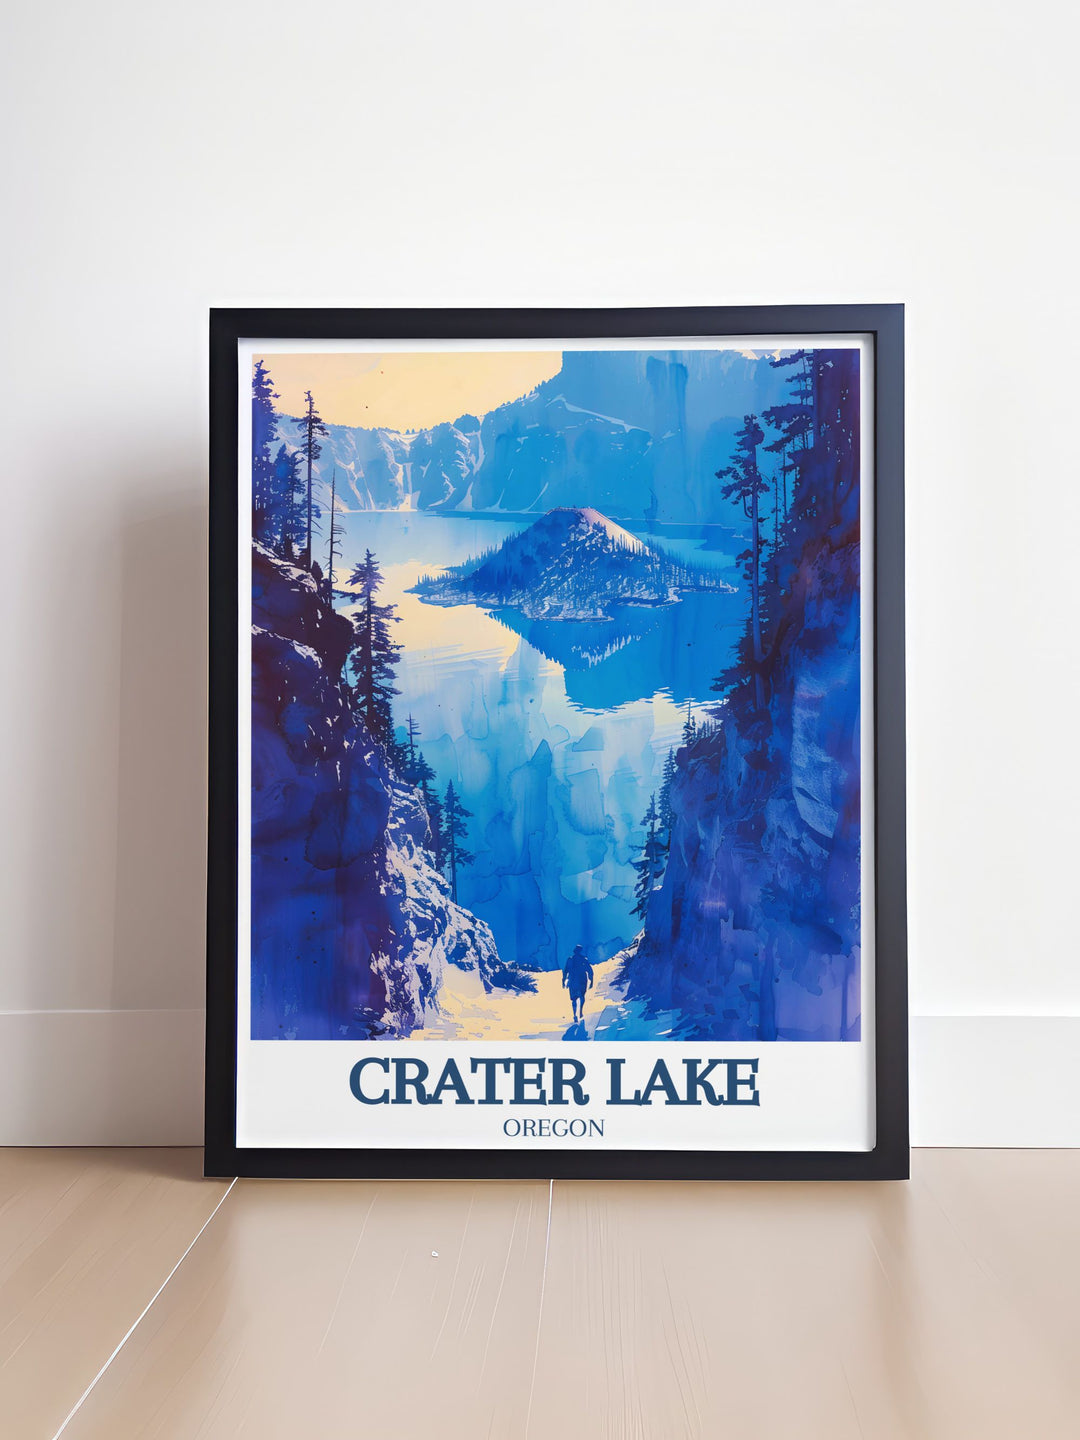 Highlighting the serene vistas of Crater Lake National Park and the vibrant scenery of Mount Scott, this travel poster is perfect for those who appreciate the scenic and adventurous richness of the United States.